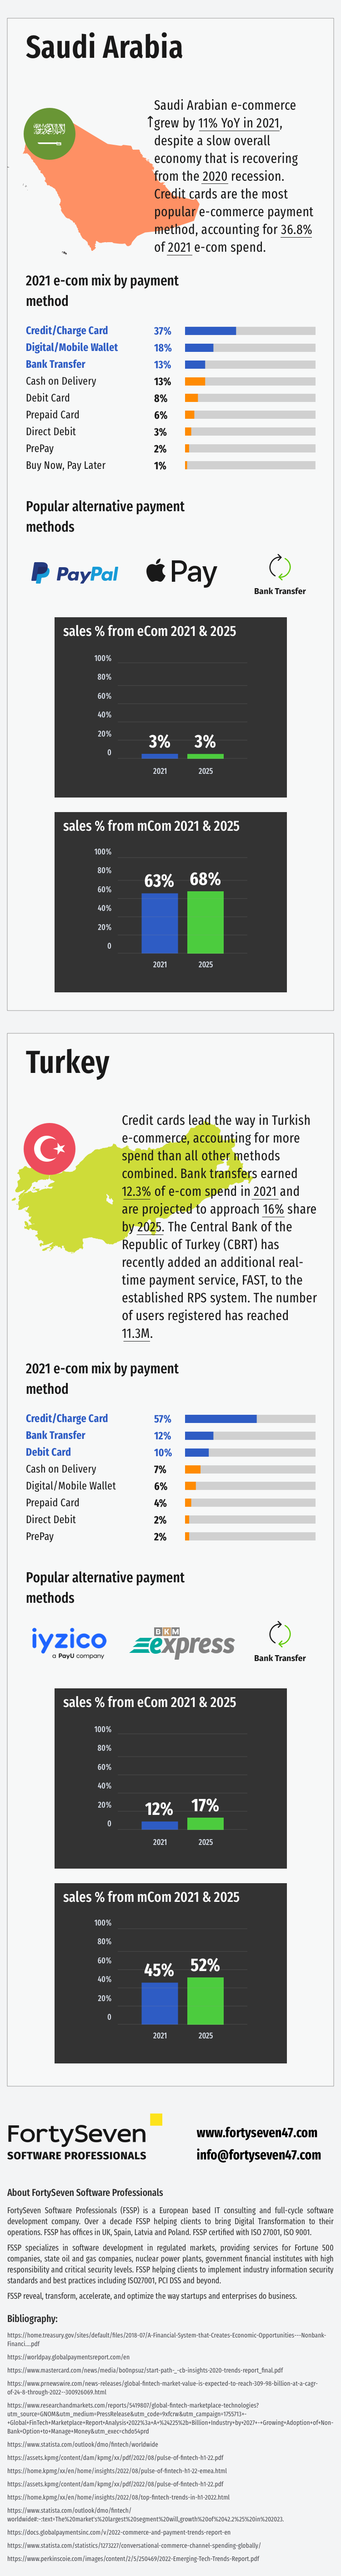 Infographic: Fintech Overview & Trends 2022 - 2024 - 31